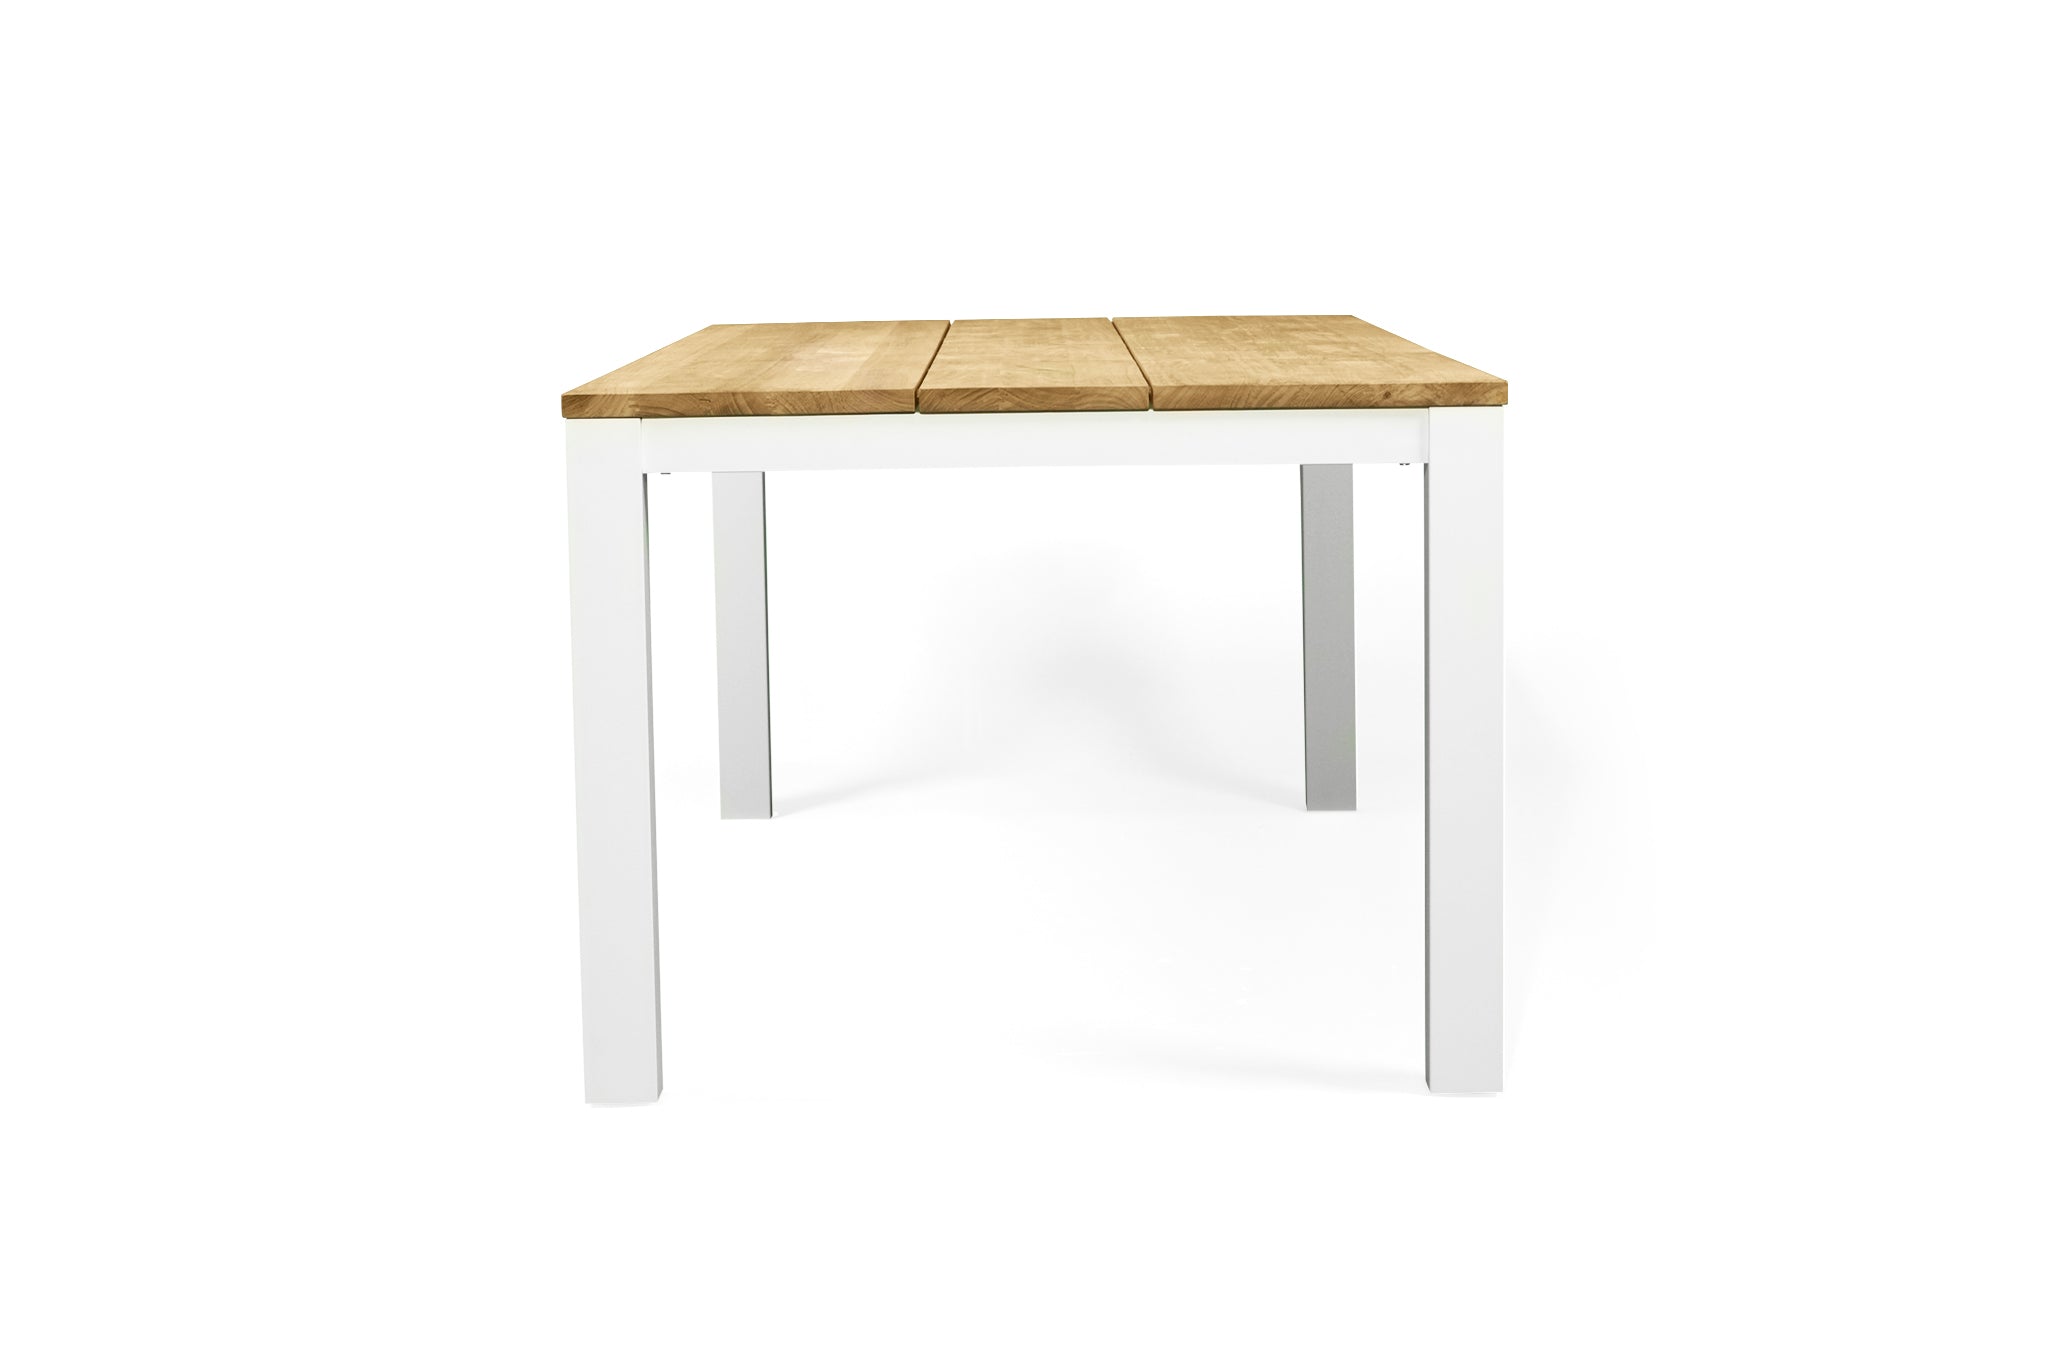 Rose Bay Outdoor Extension Table 2.3m – White Powder Coated Legs